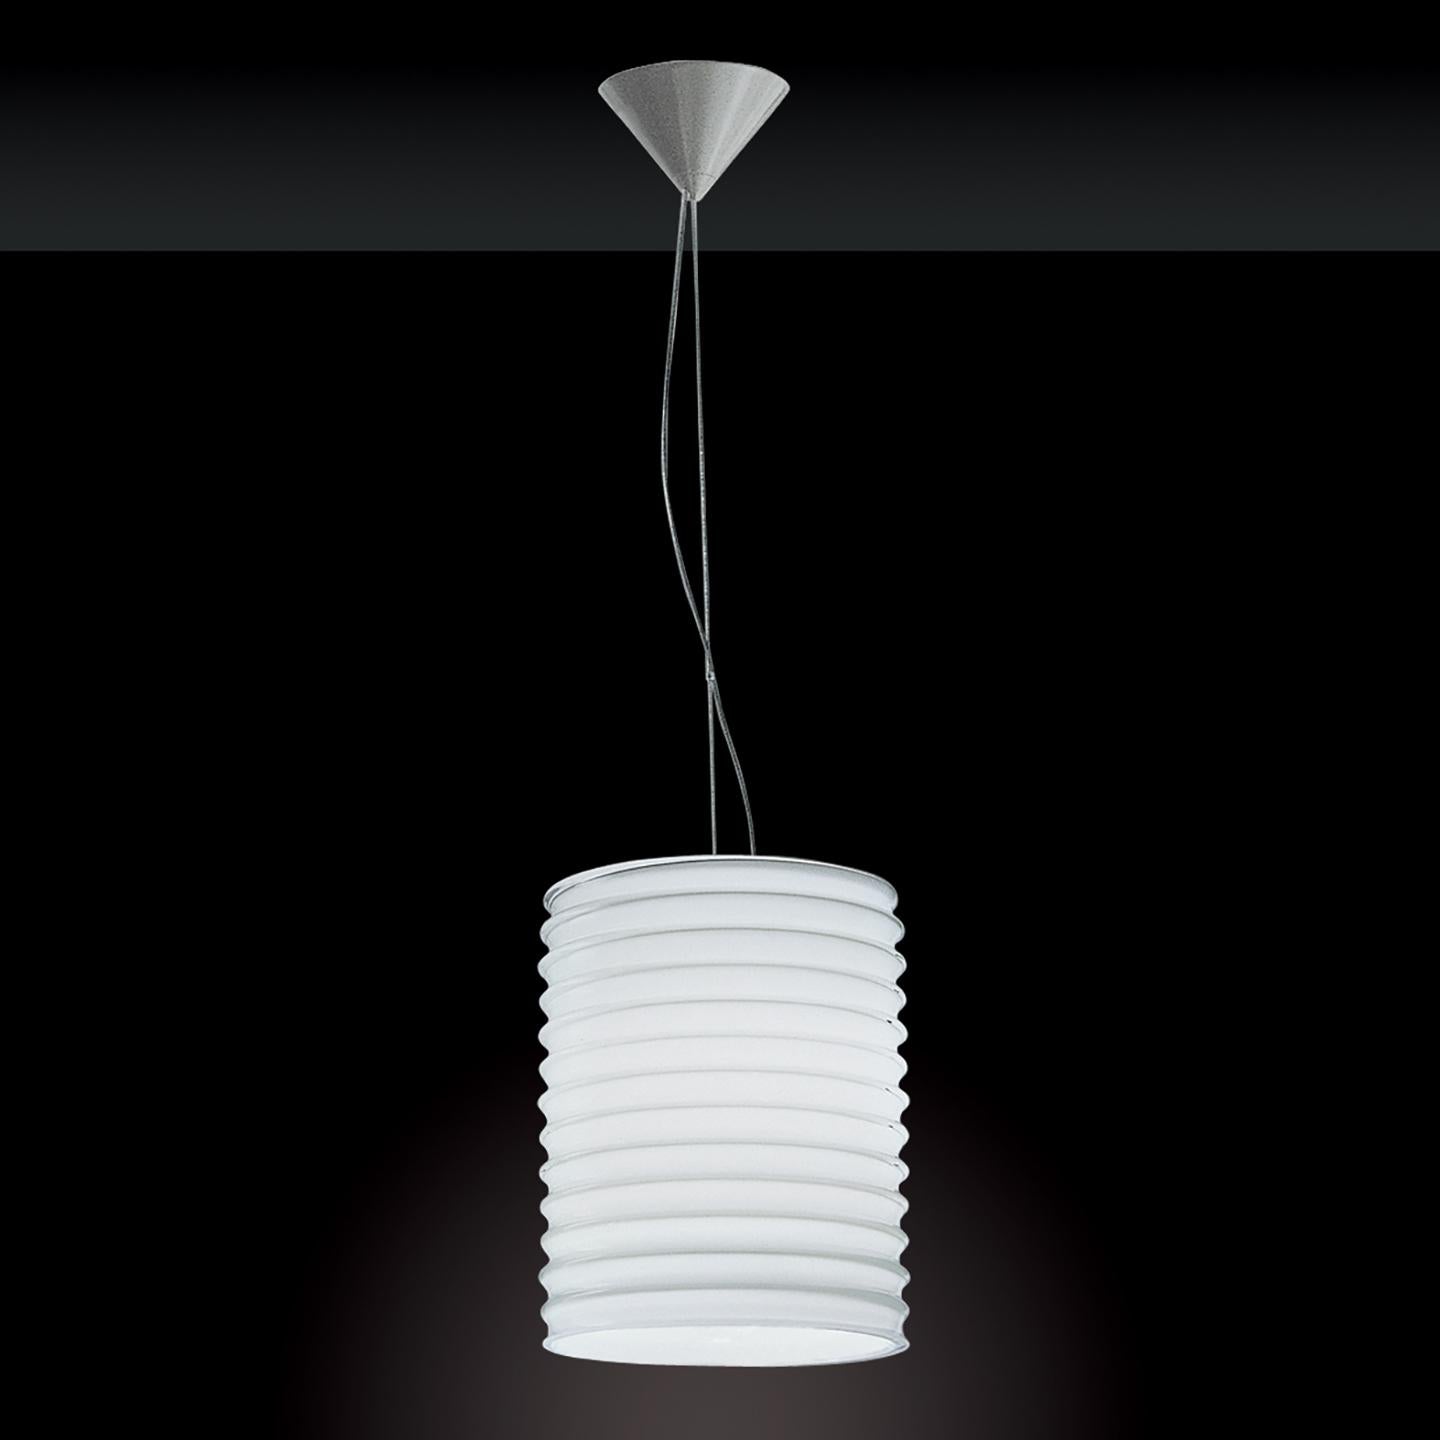 Toso, Massari & Associates designed Modulo pendant in 1998 to be a beautiful lamp that exploited Murano traditions of blowing ribbed glass. The effect is a burst of light that provides diffused and direct light. The clear outer bands of the rims are